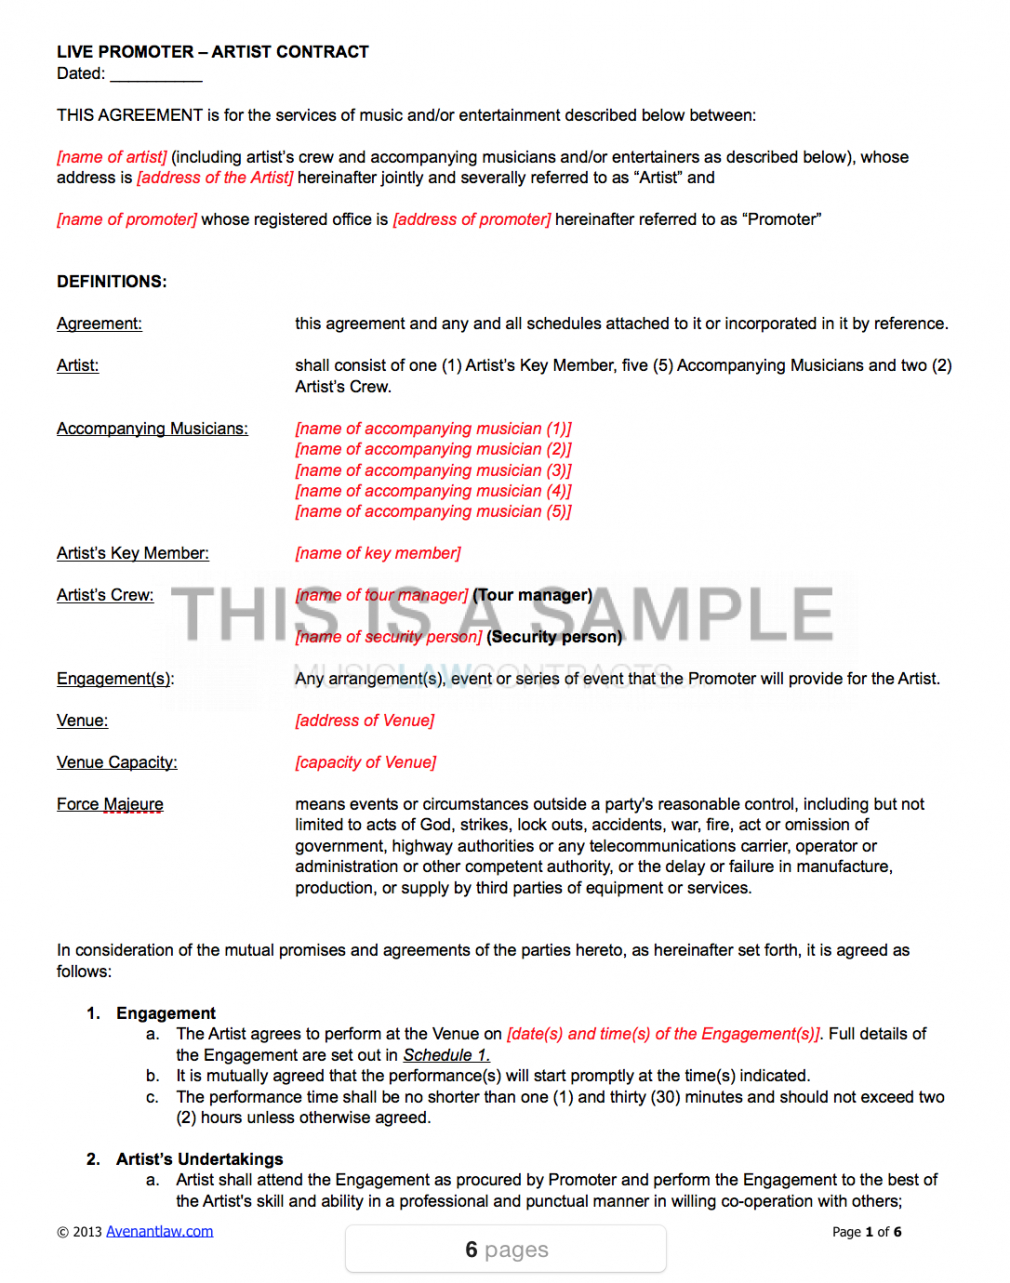 live promoter  artist contract performing artist contract template word